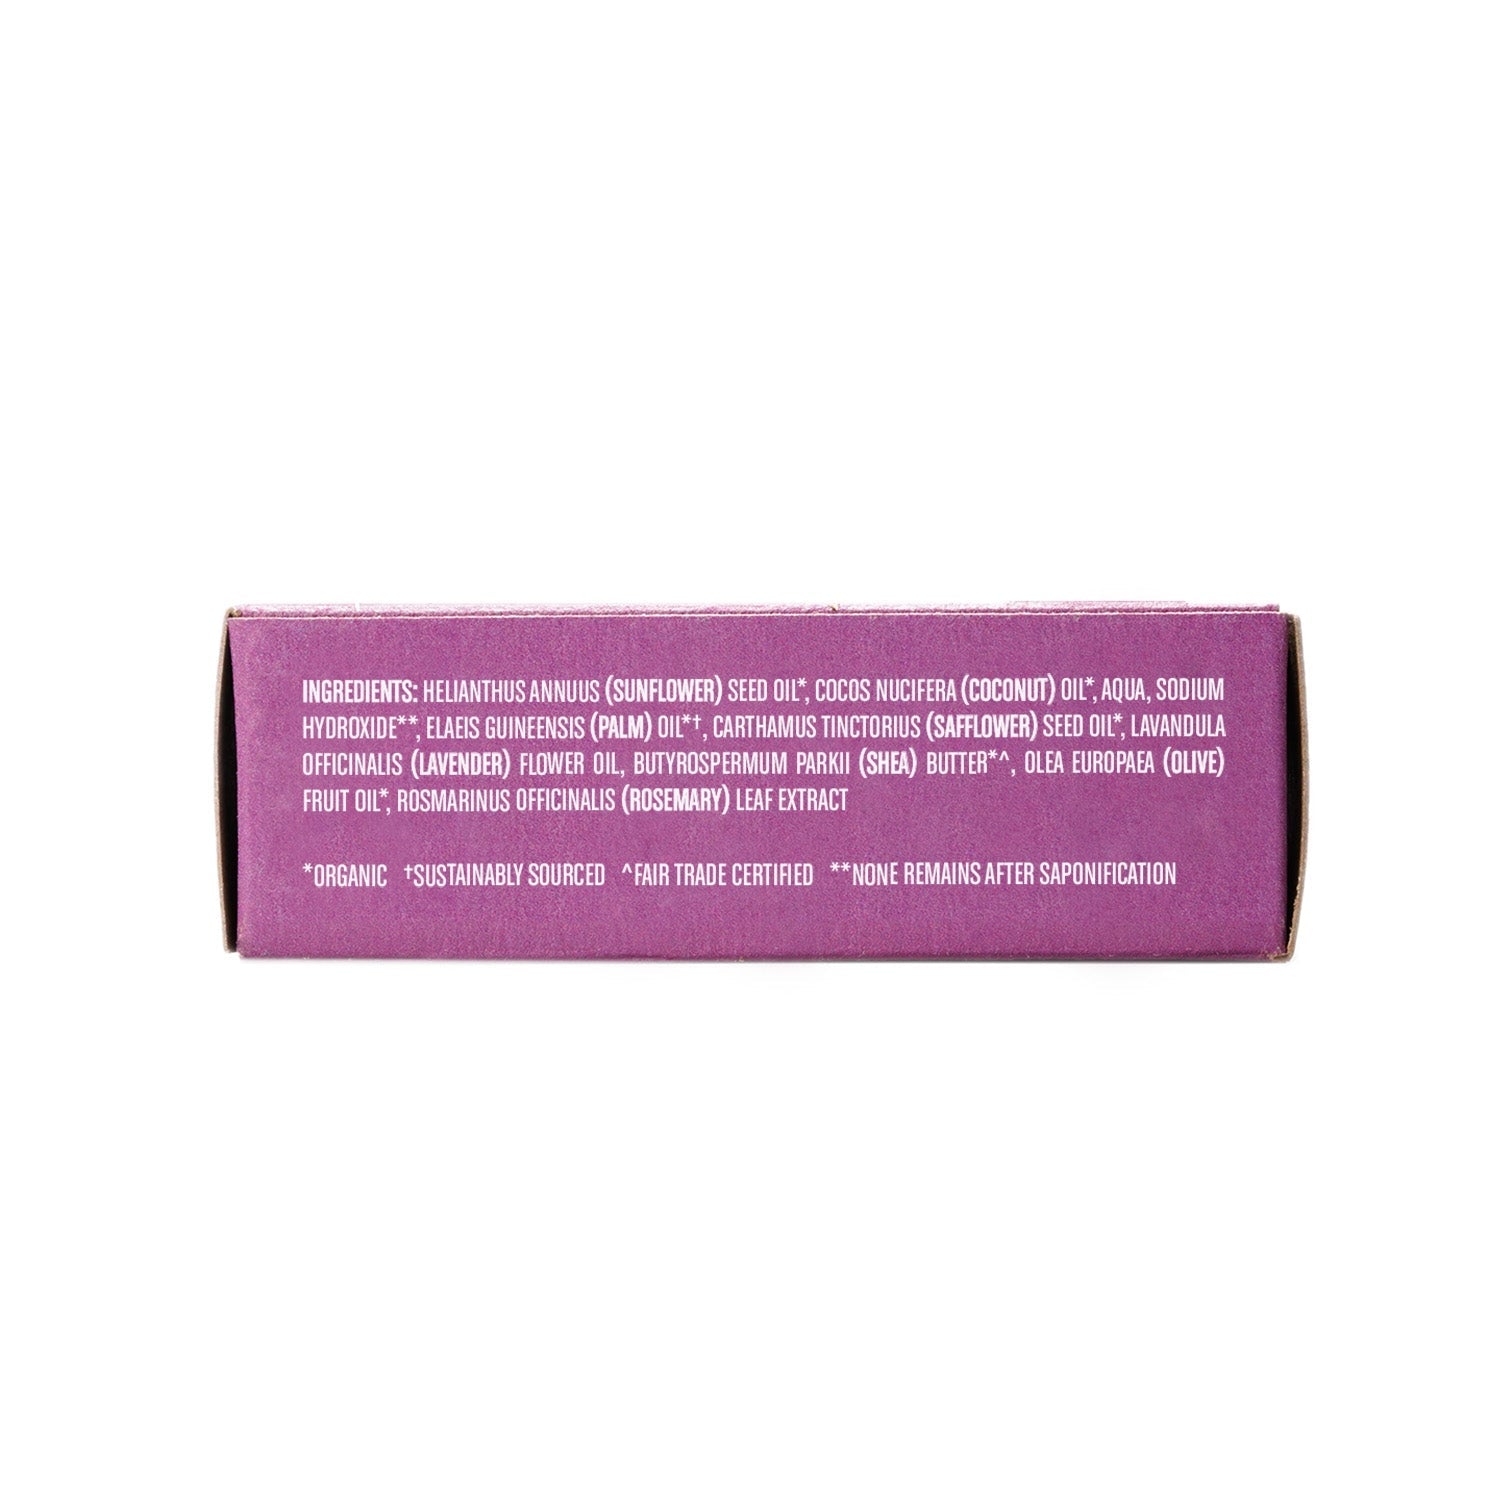 Humble Eco Friendly Cleansing Bar - Mountain Lavender